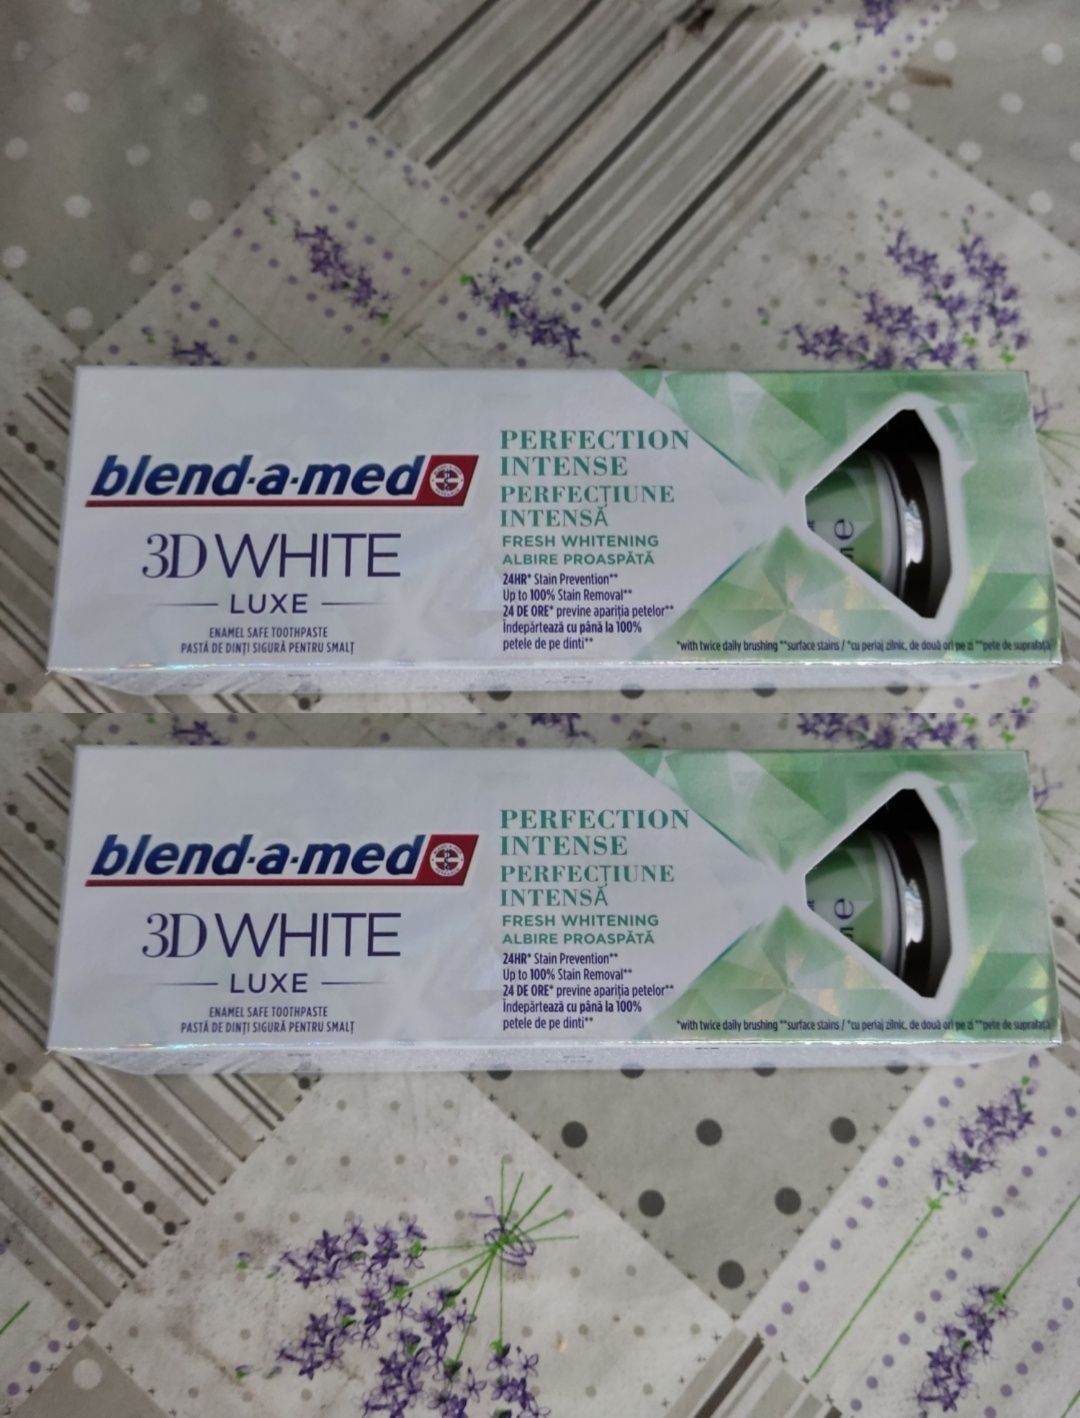 Blend-a-med 3D WHITE LUX Perfection Intence 2x 75ml